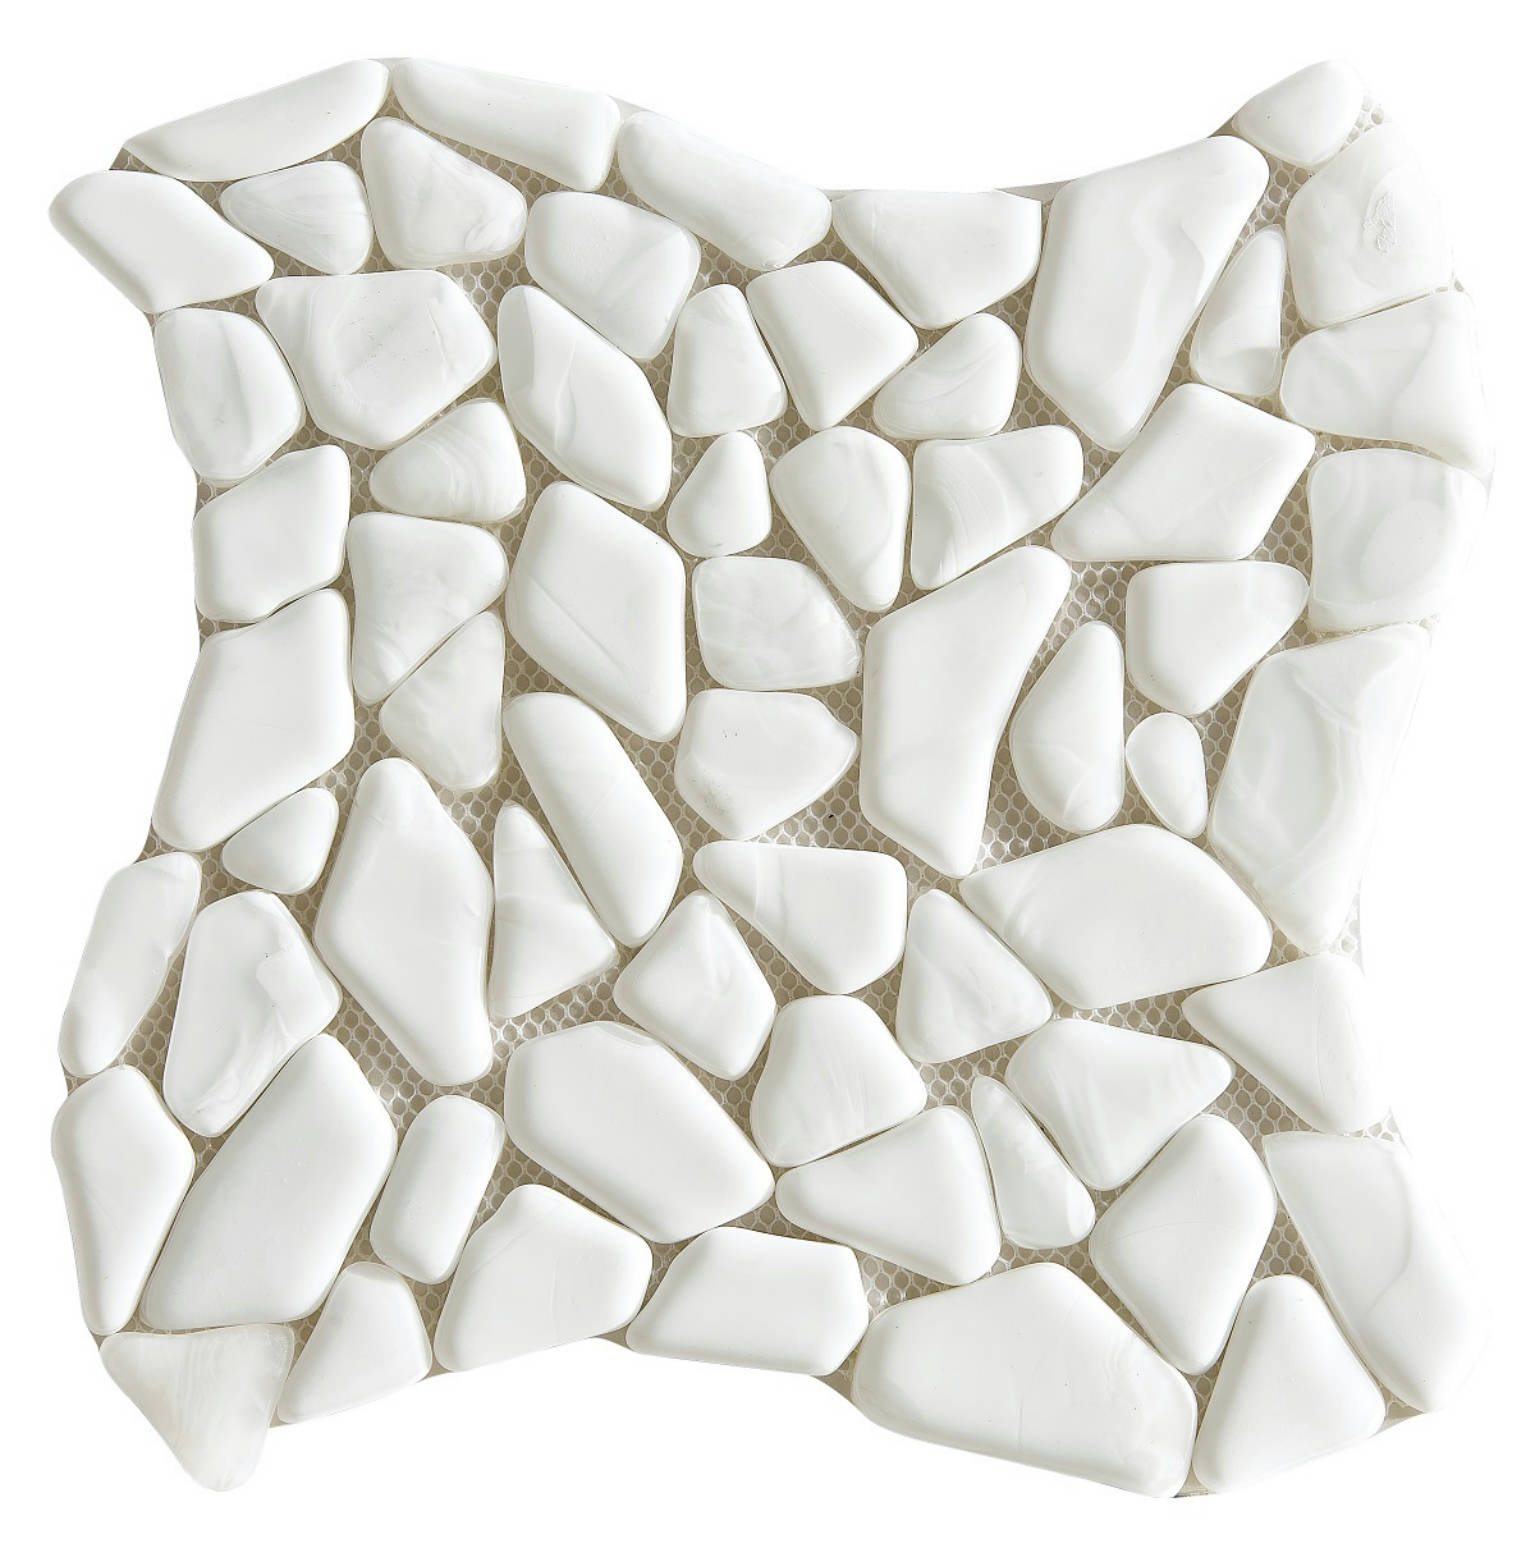 Mont Blanc | Stones And More | Finest selection of Mosaics, Glass, Tile and Stone